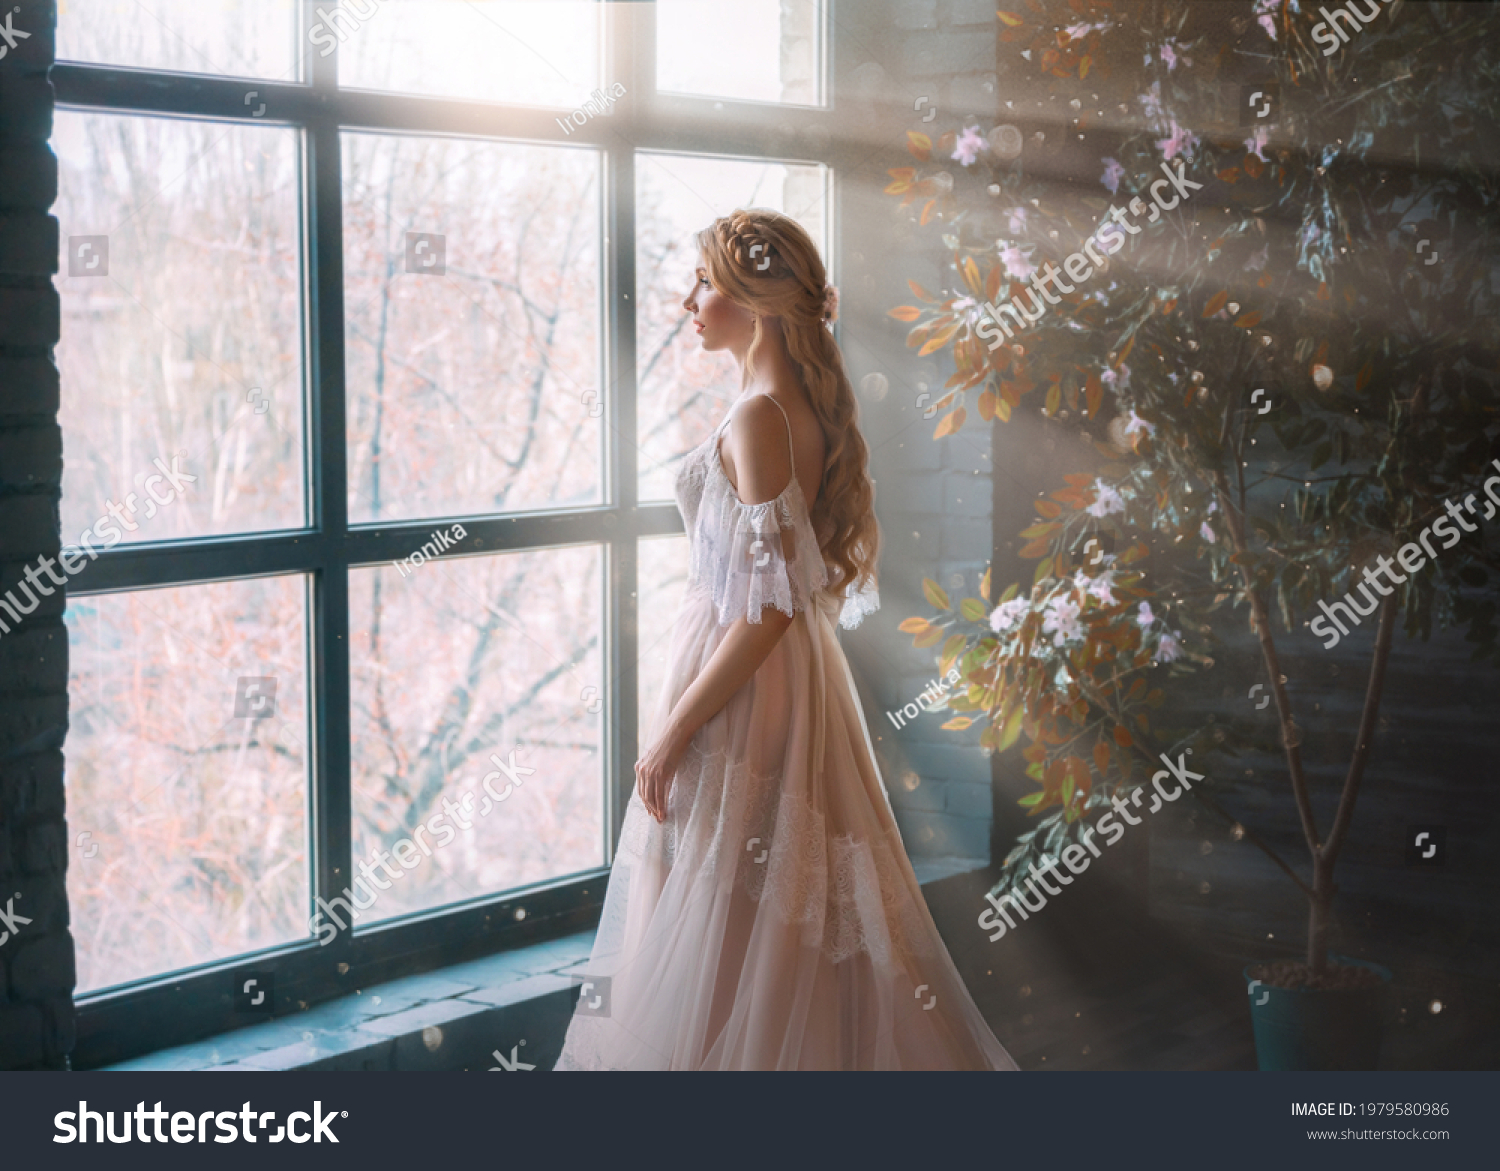 Romantic lady, blonde woman with long hair in white vintage dress stands in dark room, looks out window. Girl bride princess in wedding dress. Elegant hairstyle. Bright rays of sun concept of waiting. #1979580986